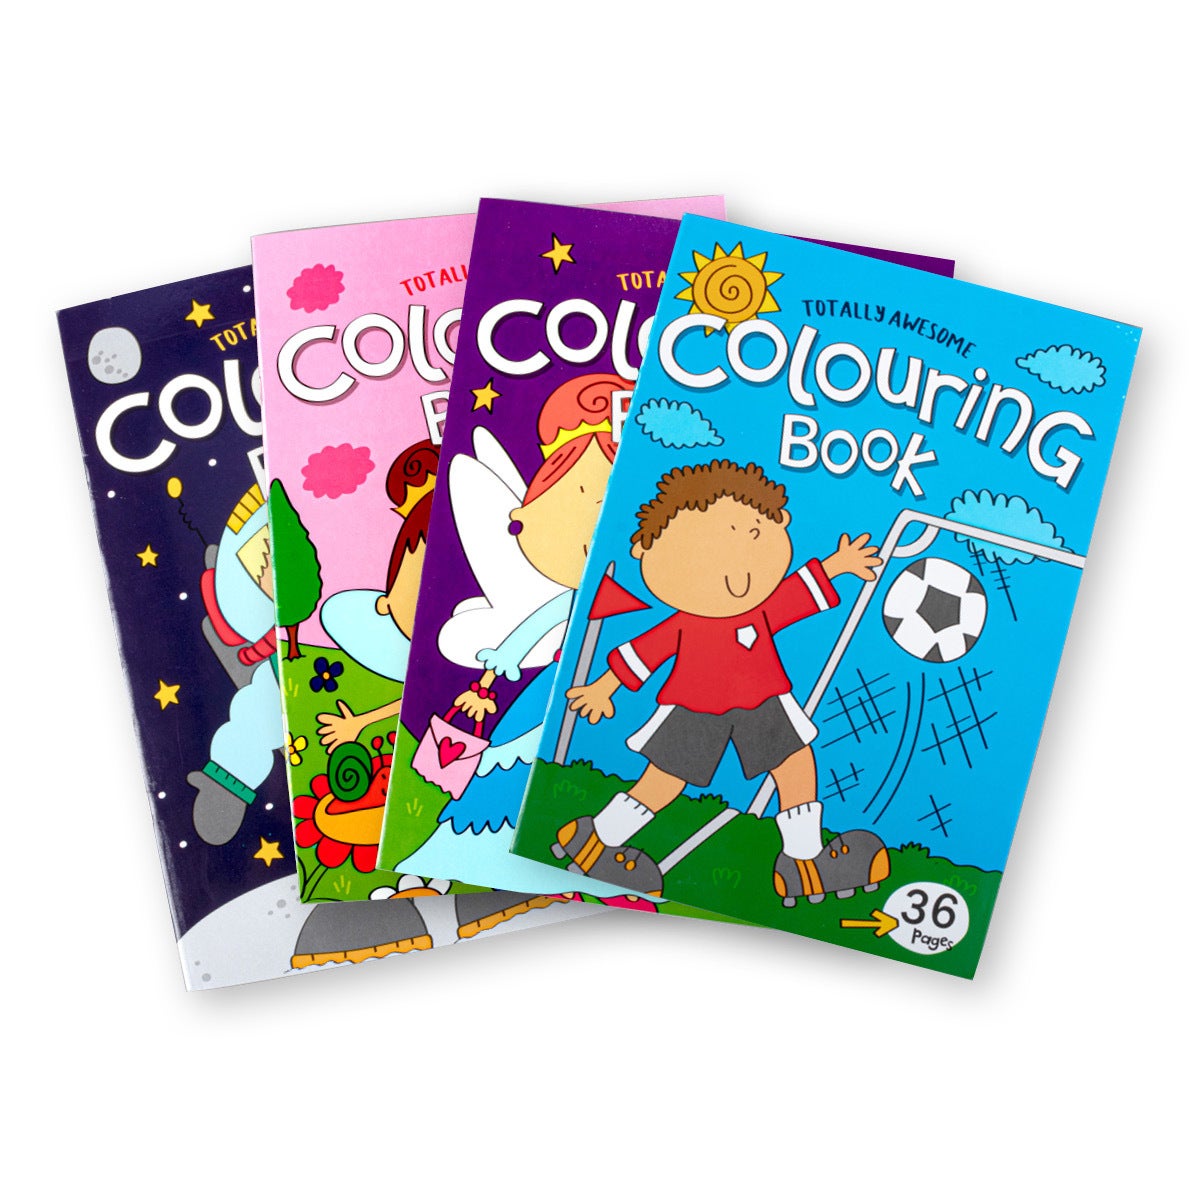 Office Central 4PK Colouring Books Sport Princess Space Fairy Themes Fun Relaxing Creative 36PG